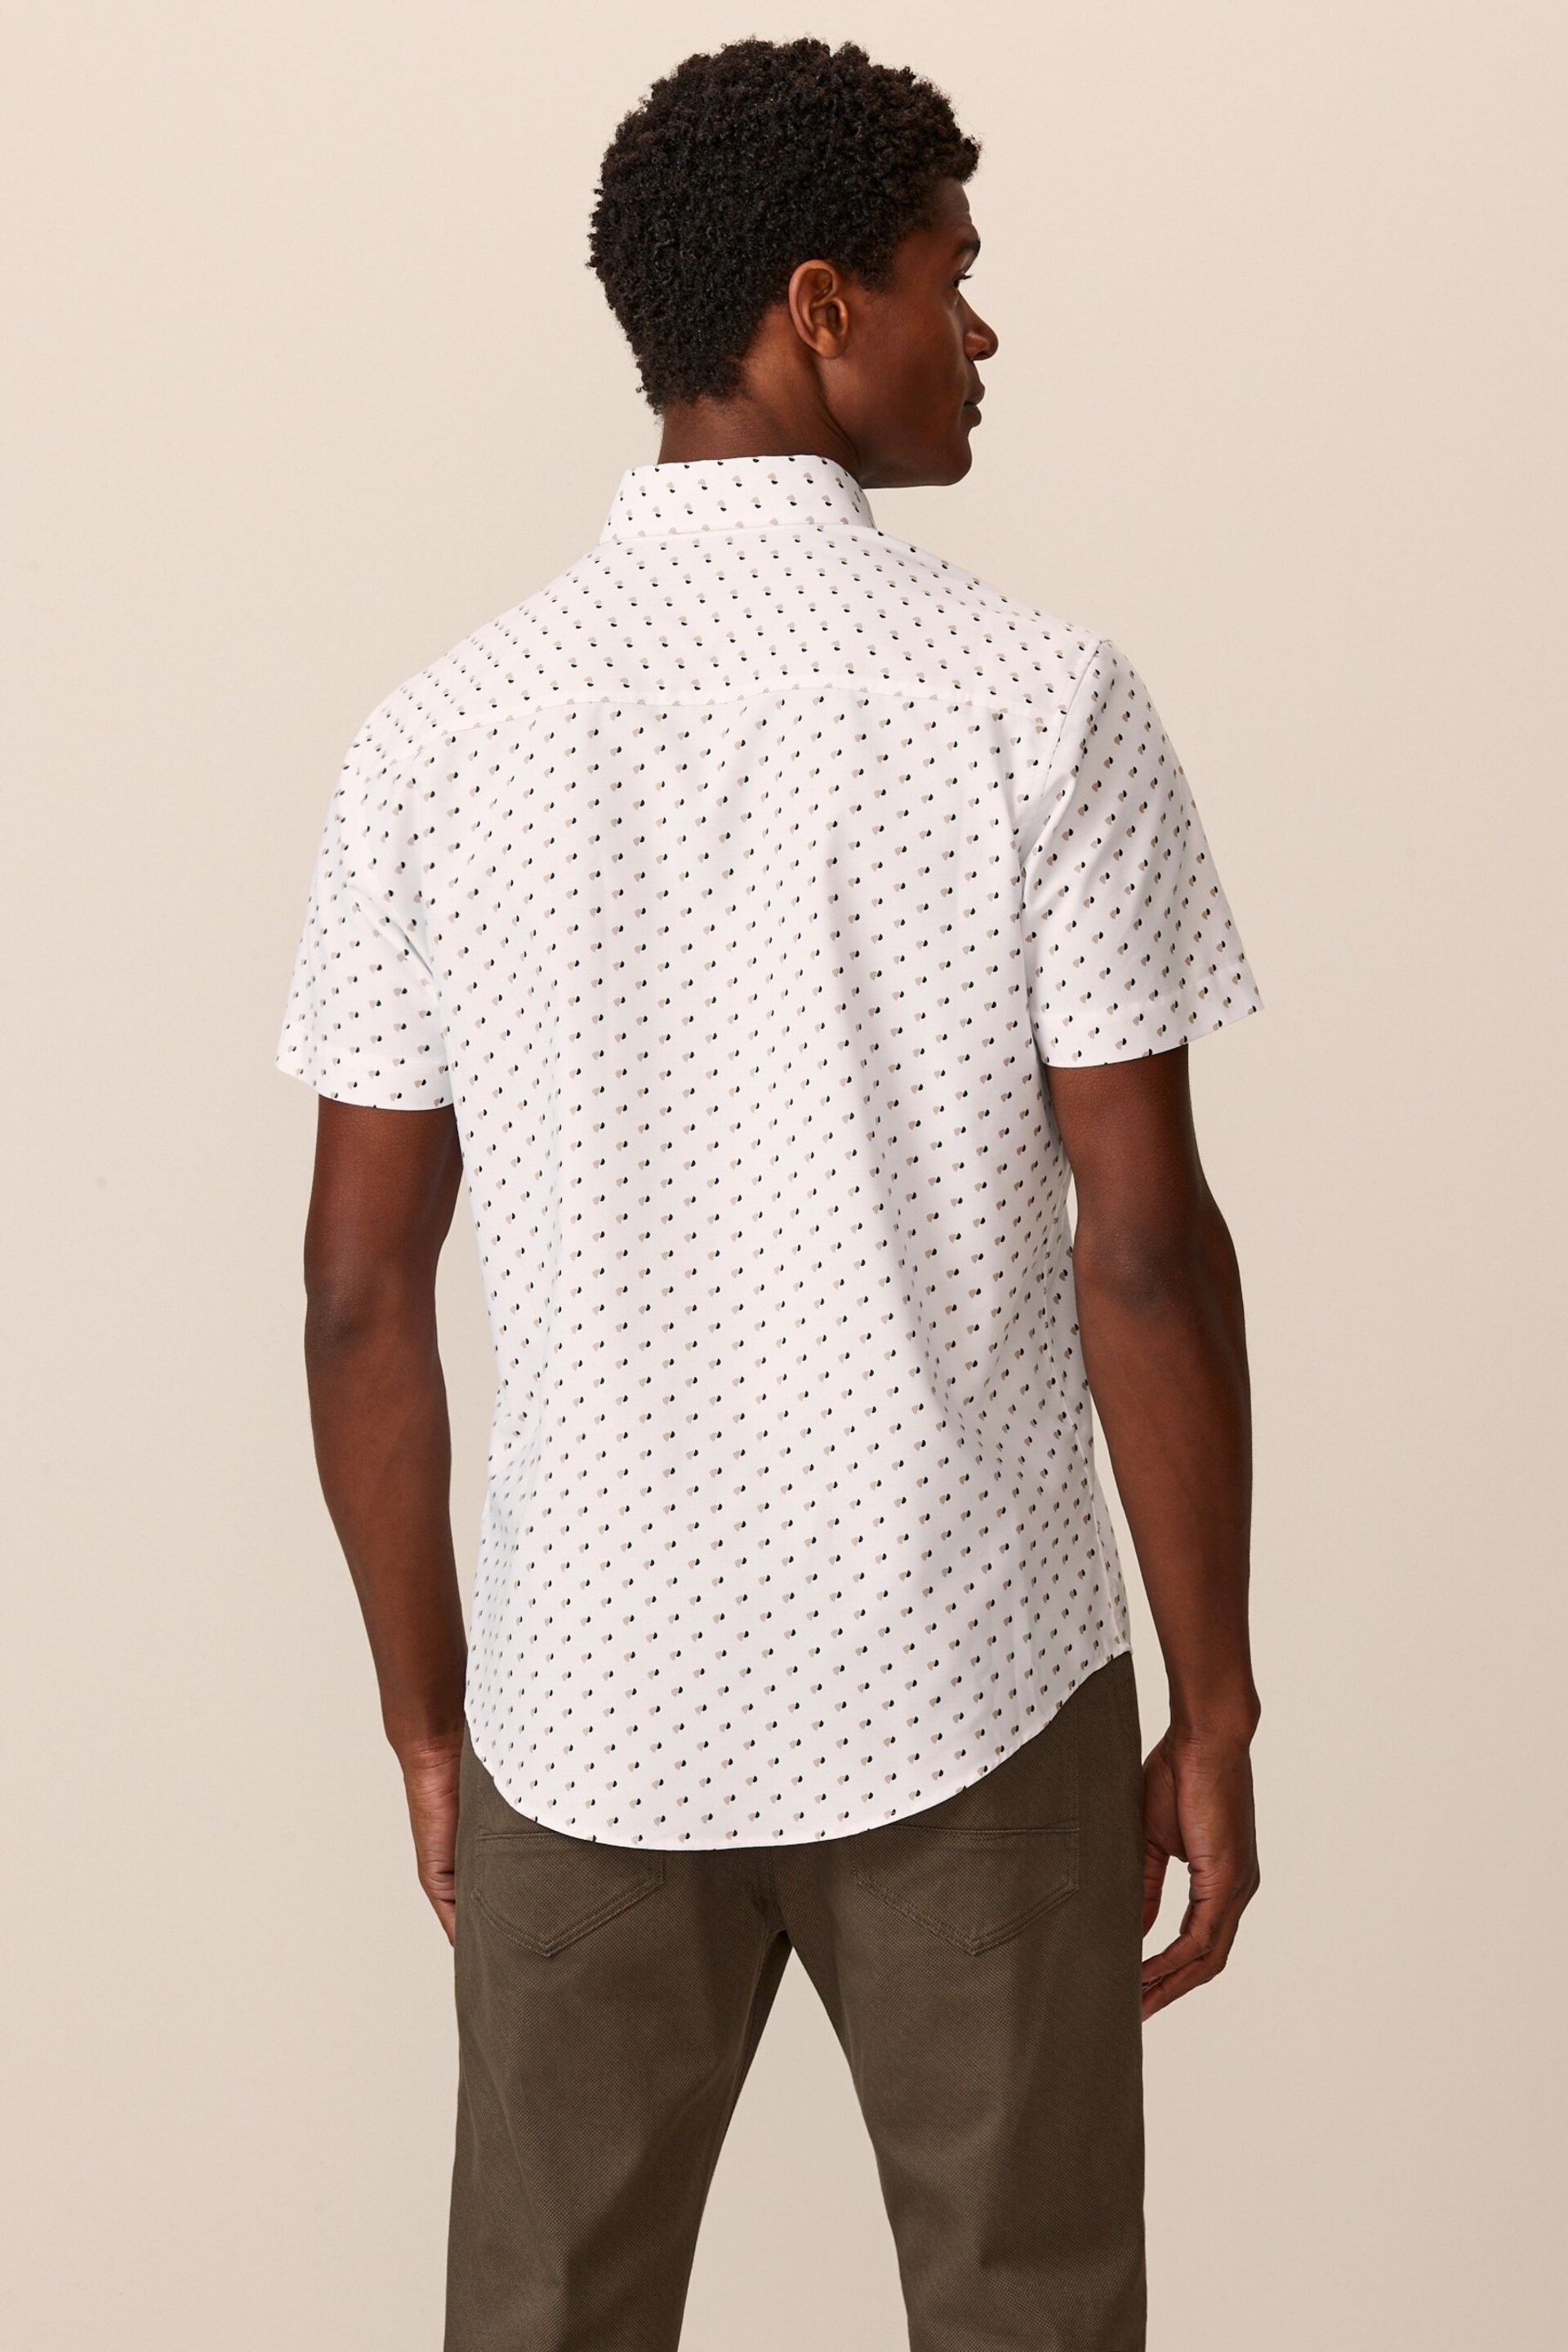 White/Neutral Brown Spot Easy Iron Button Down Short Sleeve Oxford Shirt - Image 3 of 6